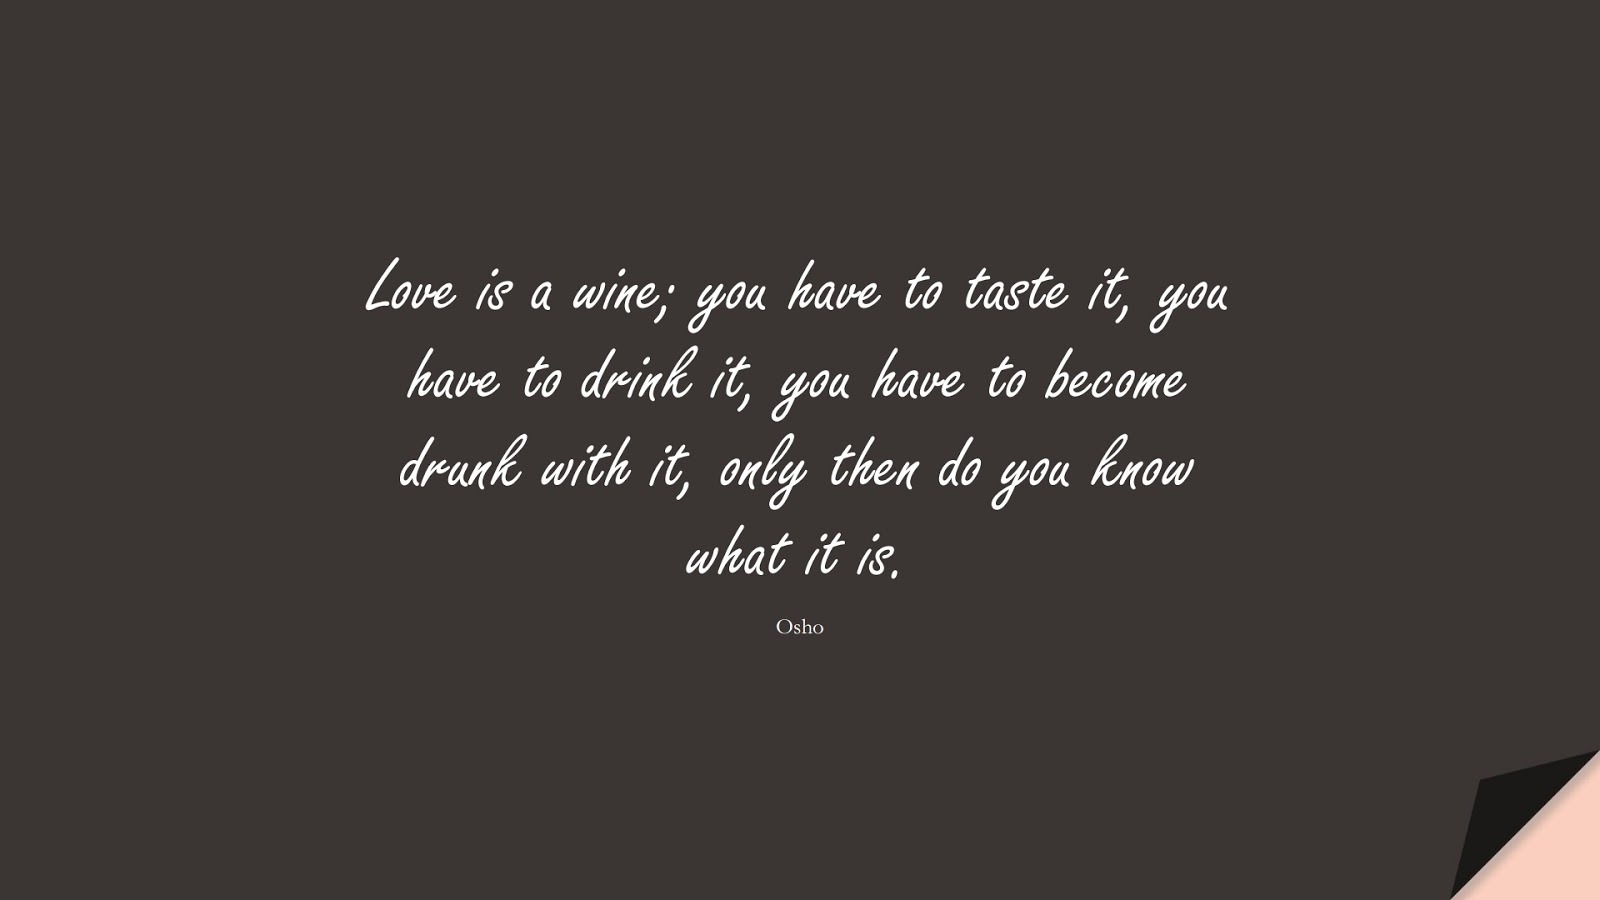 Love is a wine; you have to taste it, you have to drink it, you have to become drunk with it, only then do you know what it is. (Osho);  #LoveQuotes